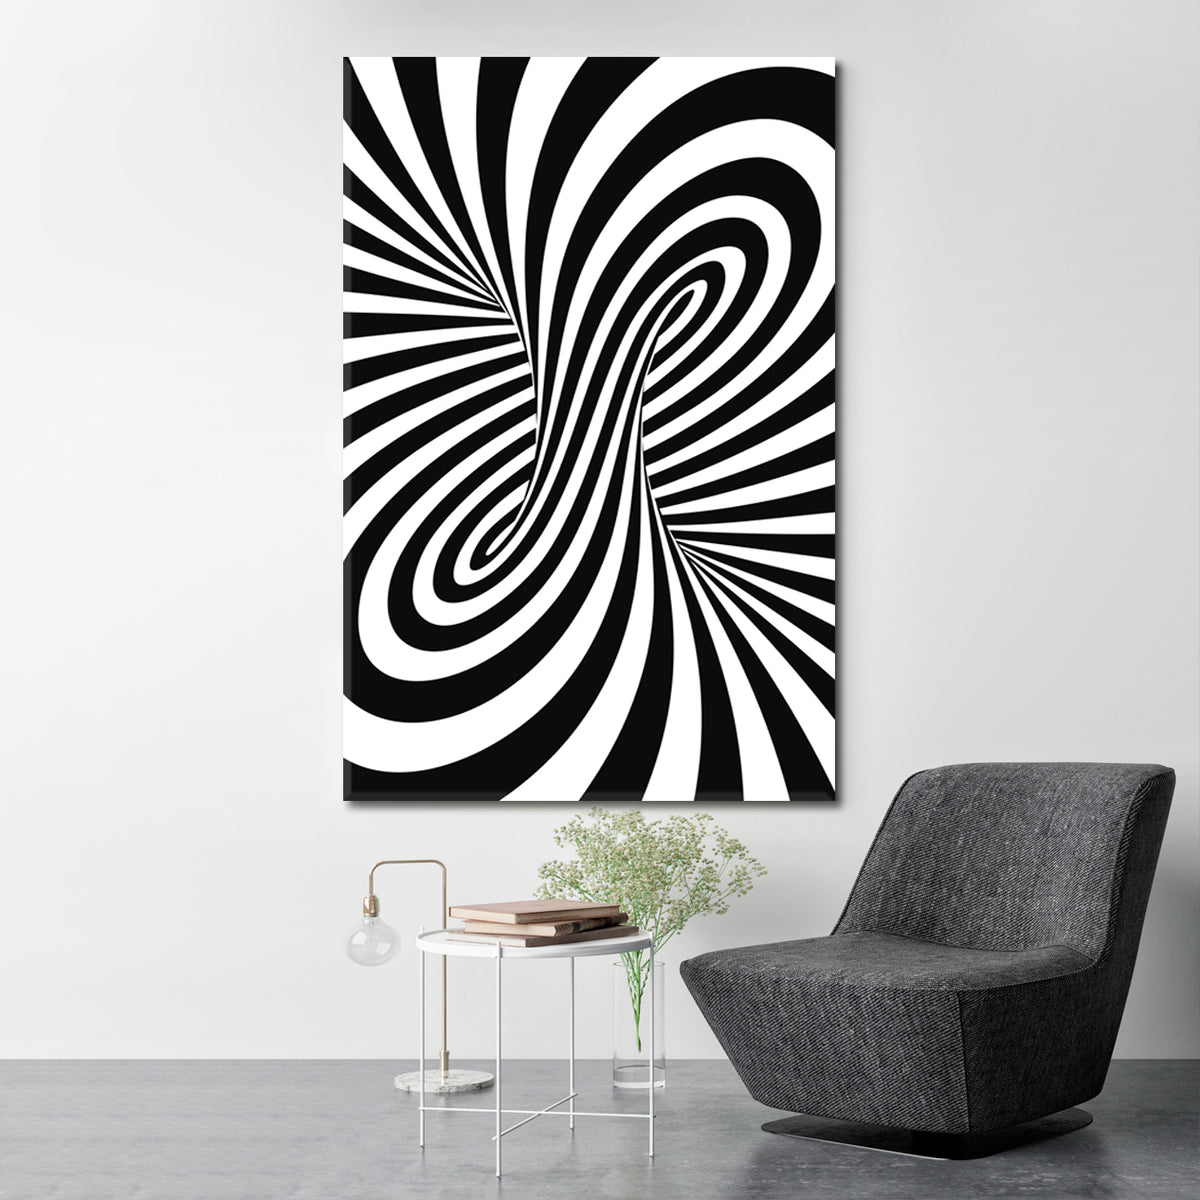 Abstract Black And White Spiral Optical Illusion Abstract Art Print Artesty 1 Panel 16"x24" 